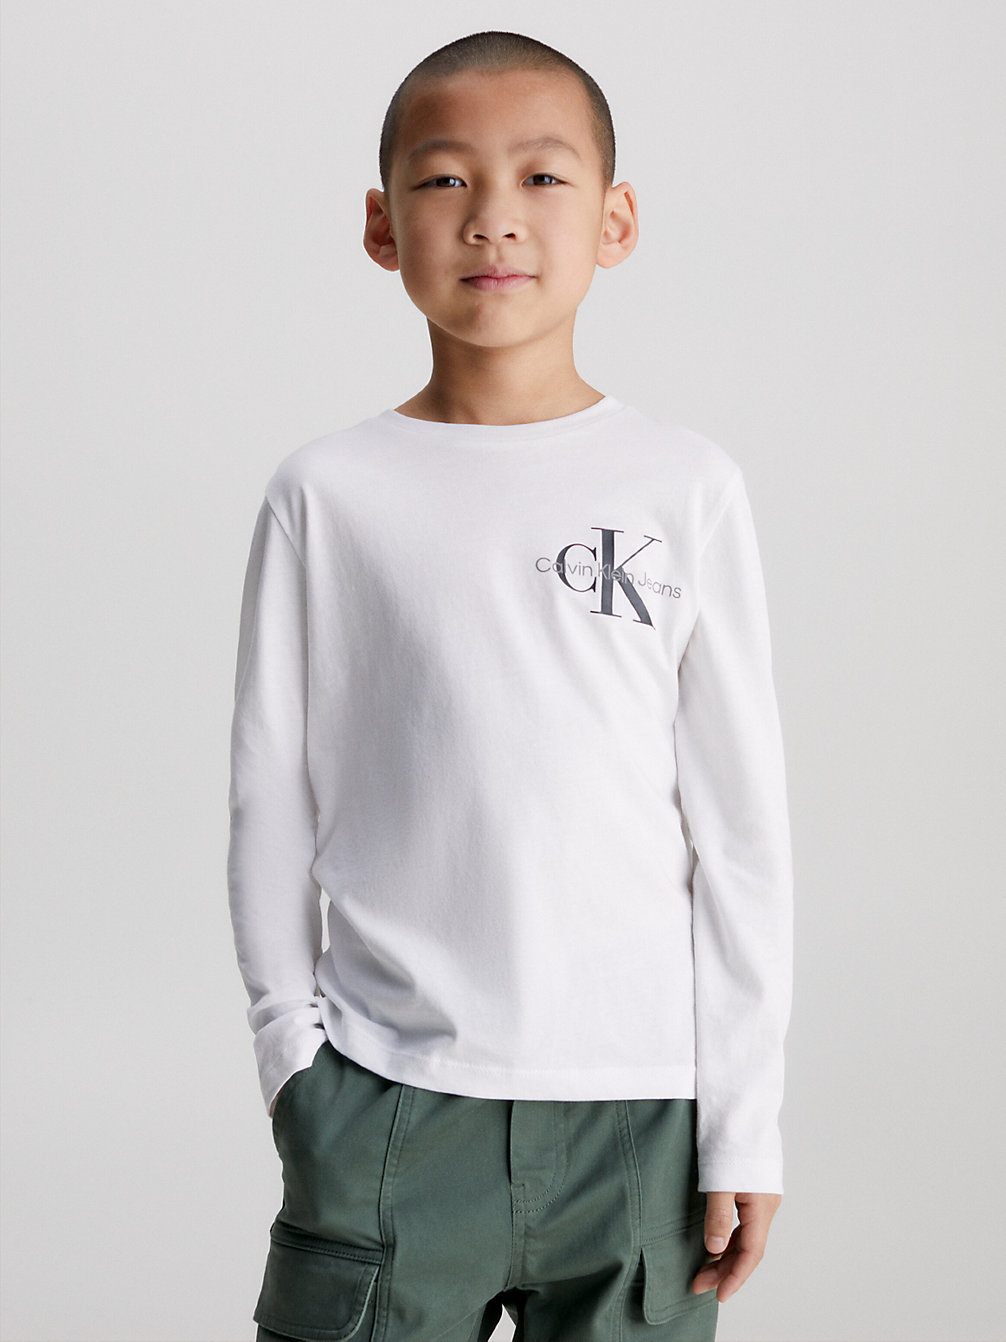 BRIGHT WHITE Long Sleeve Knit Top undefined boys Calvin Klein